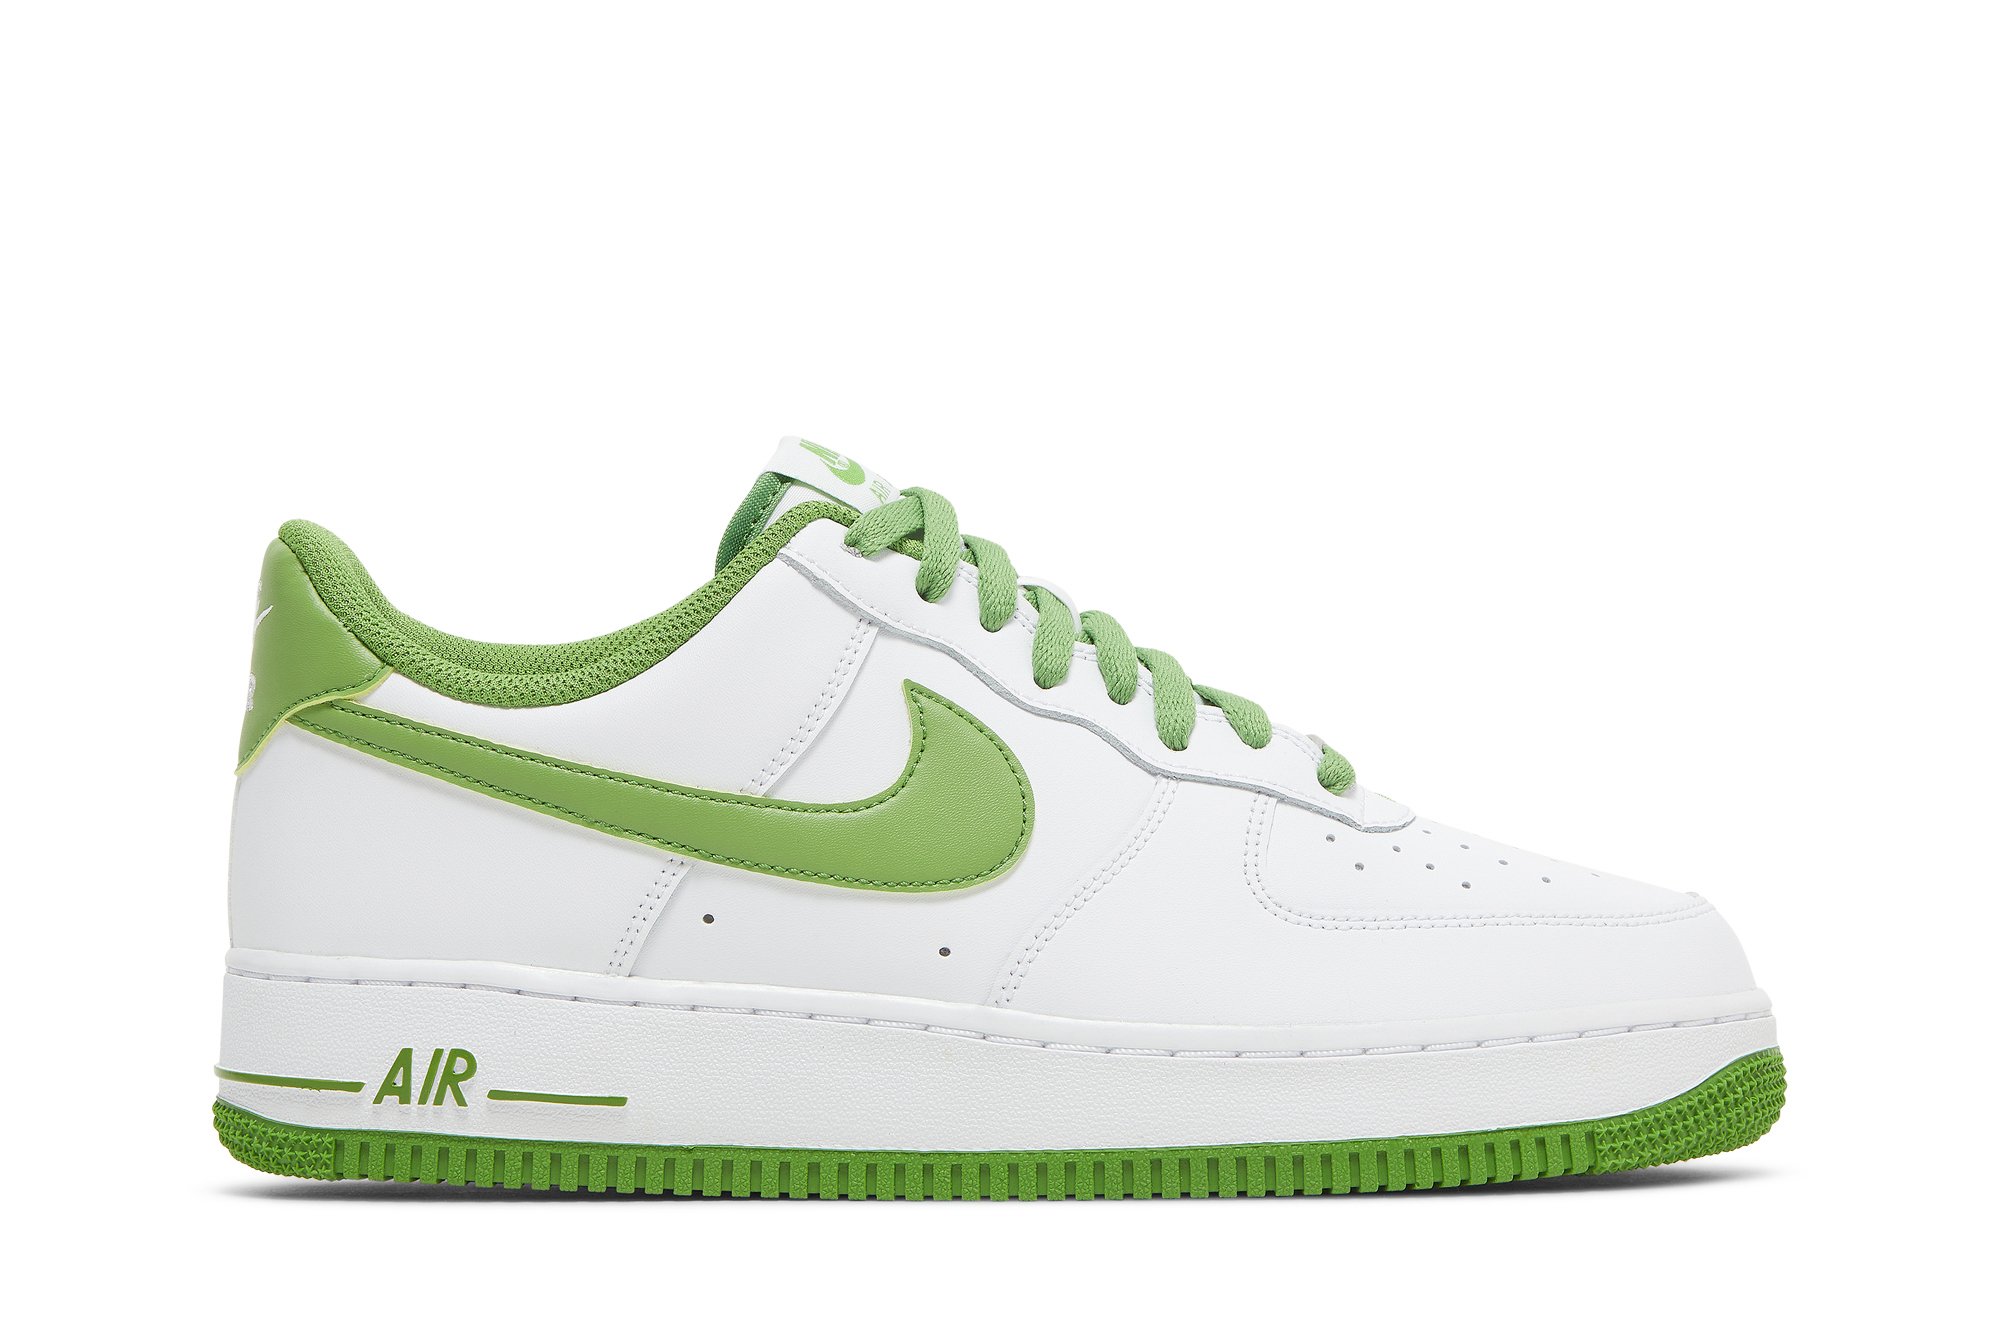 Buy Air Force 1 '07 'White Chlorophyll' - DH7561 105 | GOAT